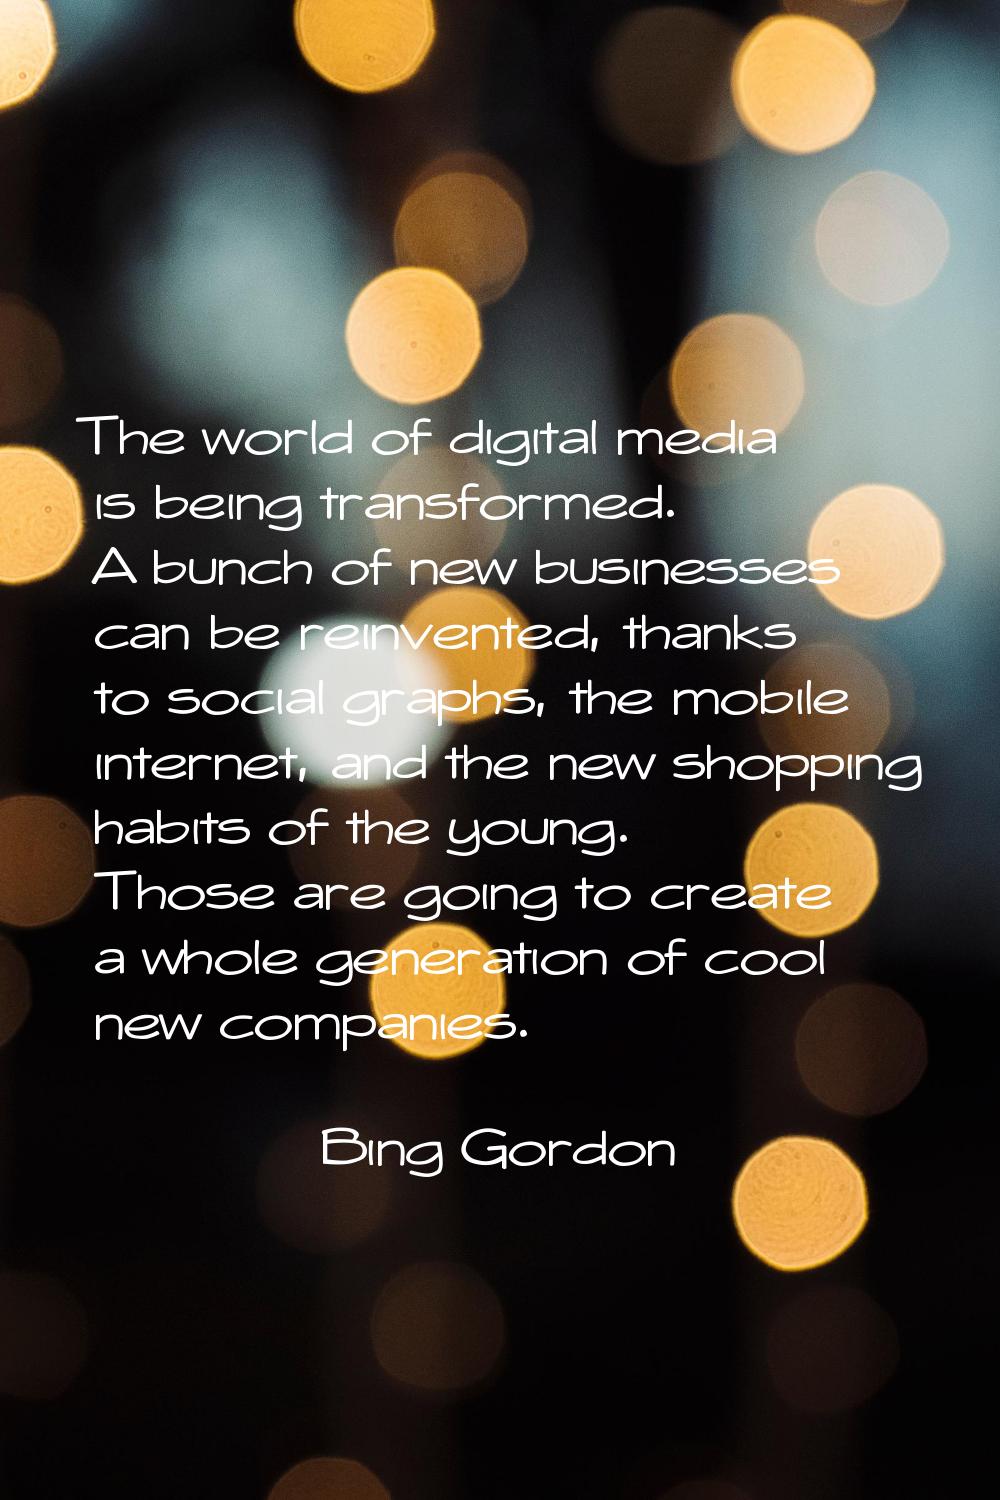 The world of digital media is being transformed. A bunch of new businesses can be reinvented, thank